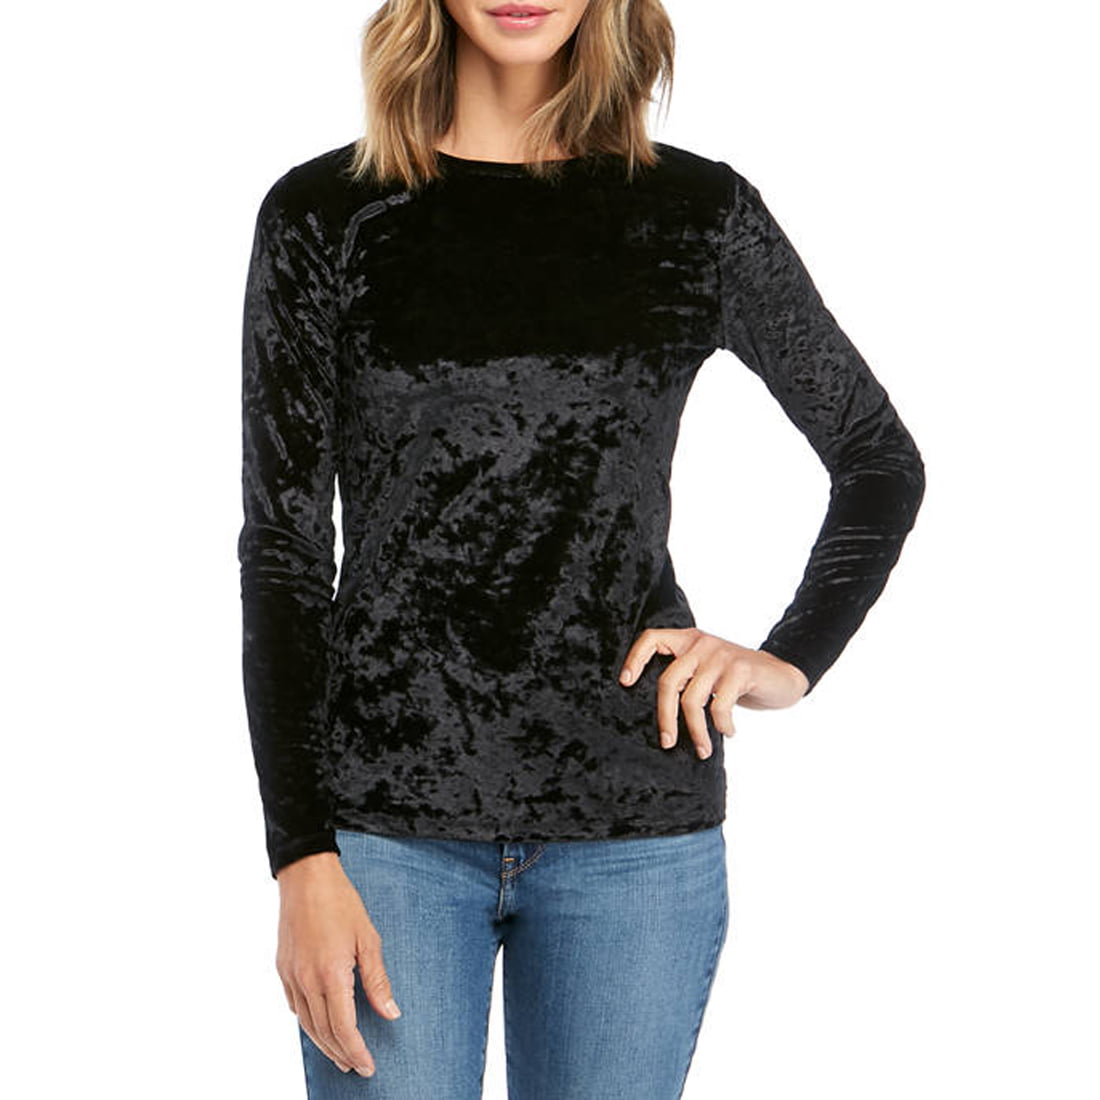 Michael Kors Tunic in Black Womens Clothing Tops Long-sleeved tops 